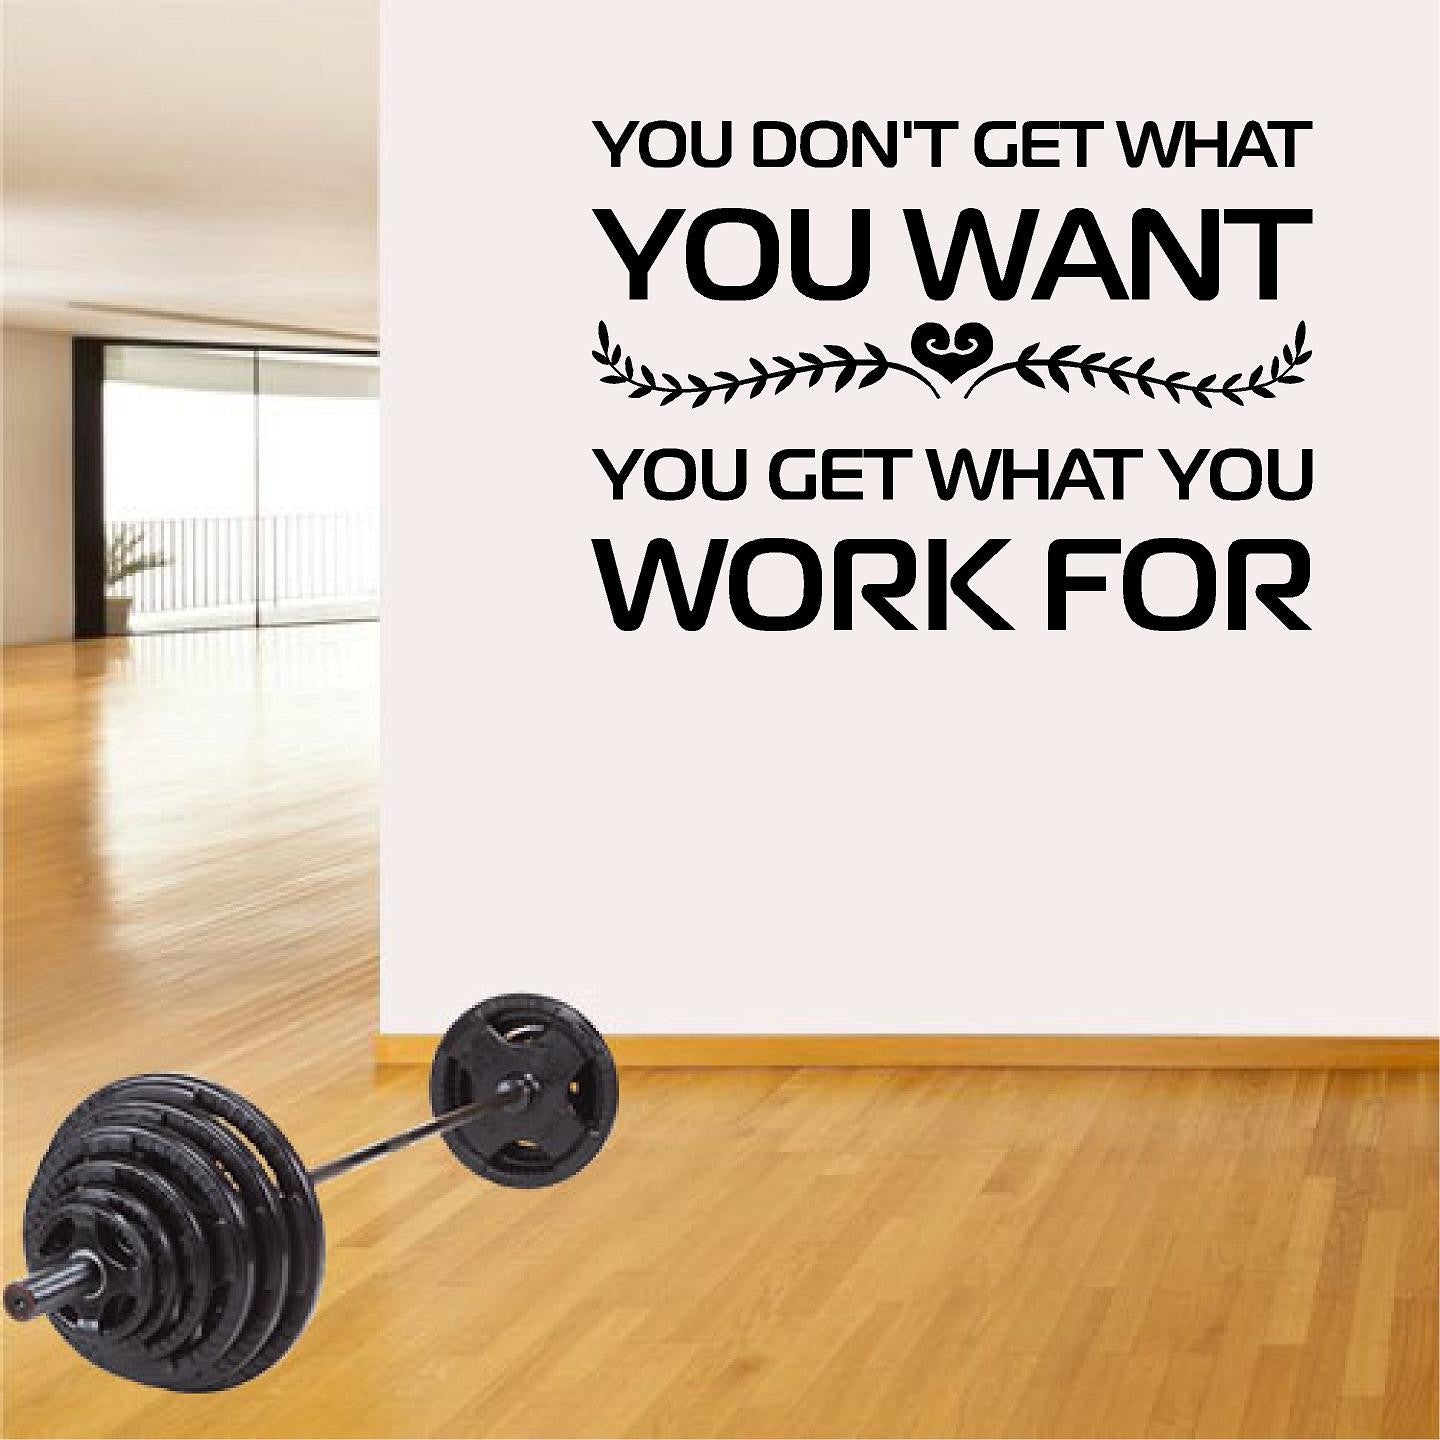 Stickers. Vinyl Wall Decal. Fitness. Gym. Exercise:  You don't get what you want. You Get what you Work For.